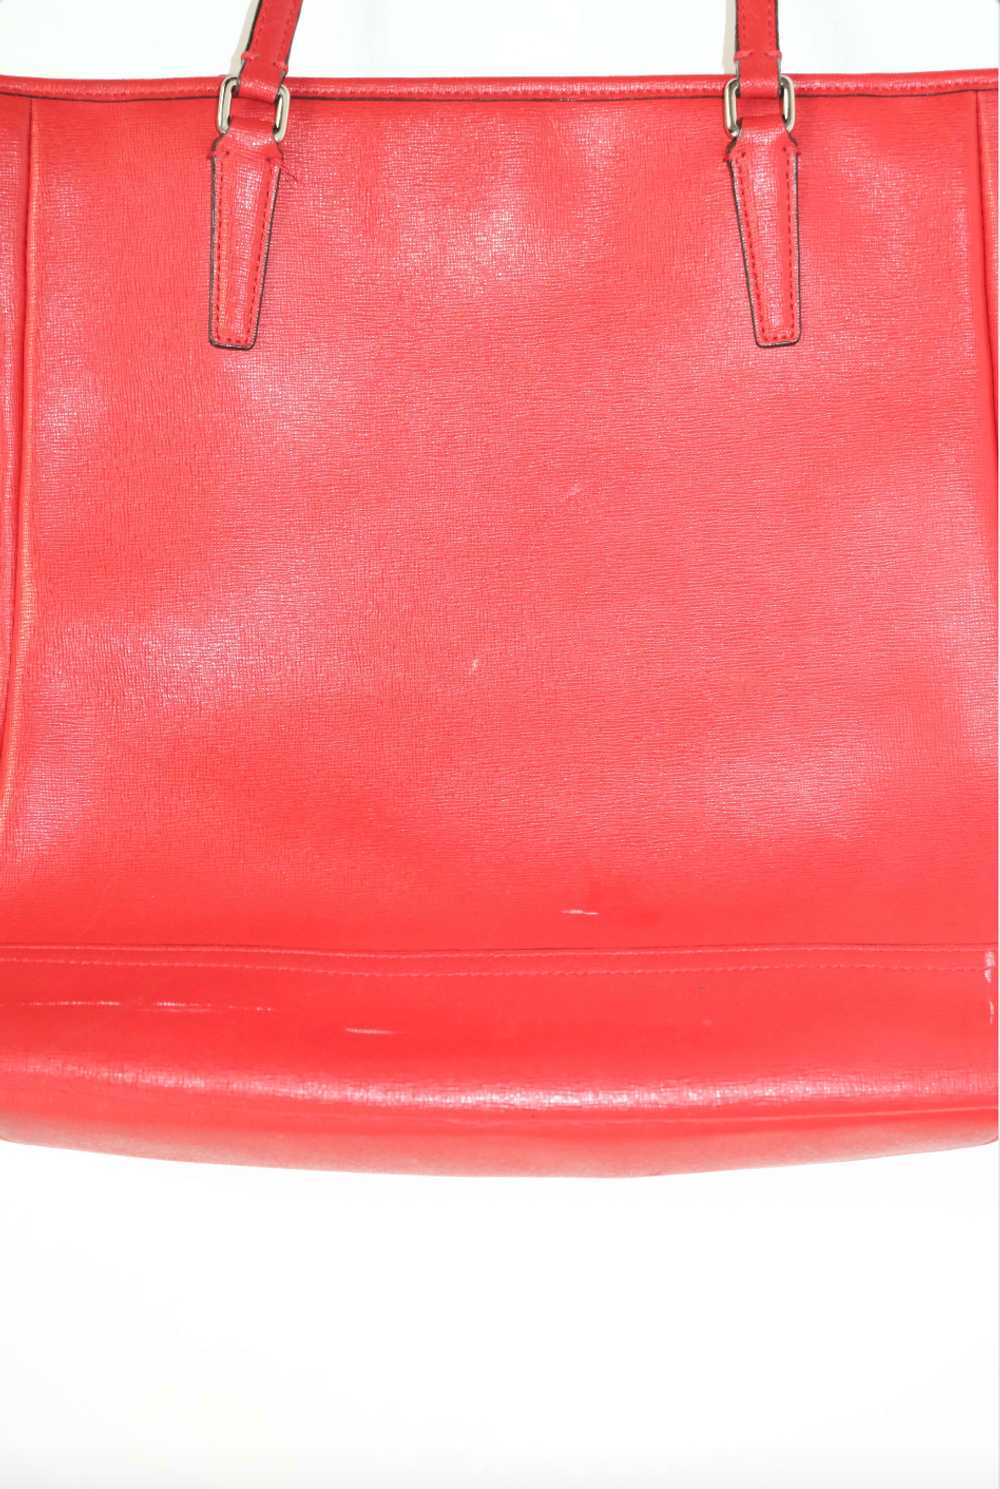 Cherry Red Coach Tote - image 6